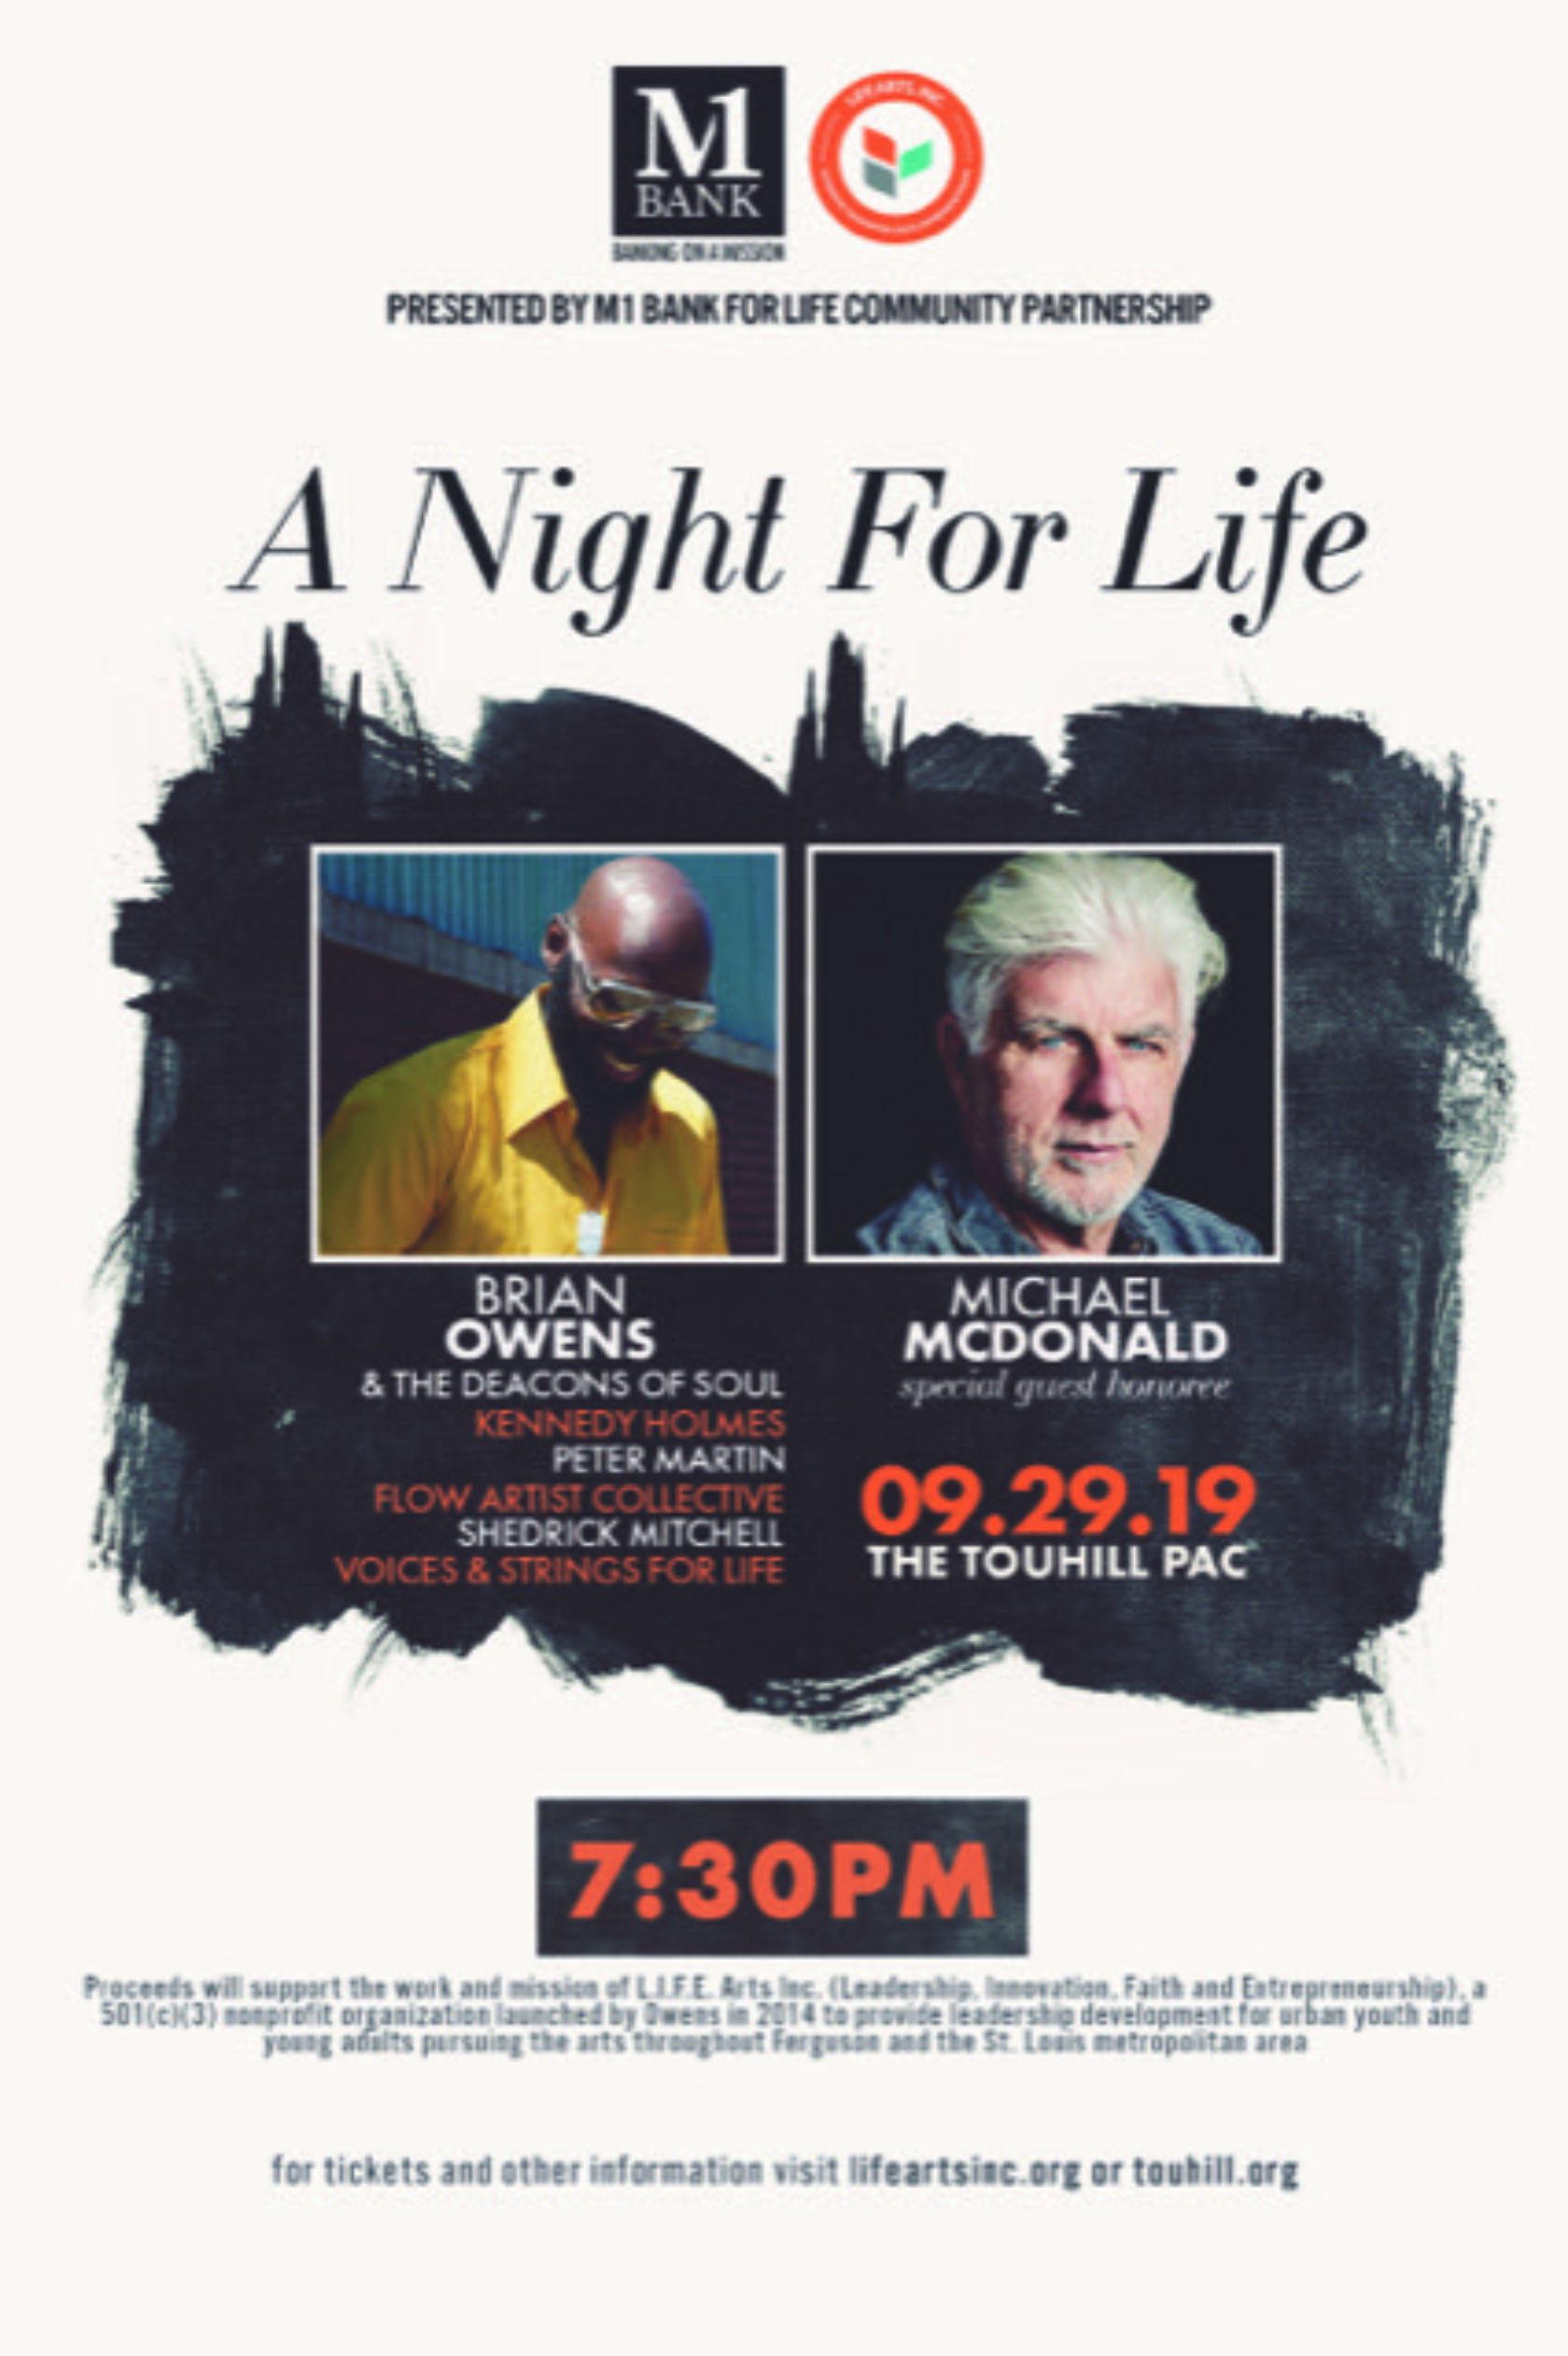 “A Night For Life” with Michael McDonald & Brian Owens